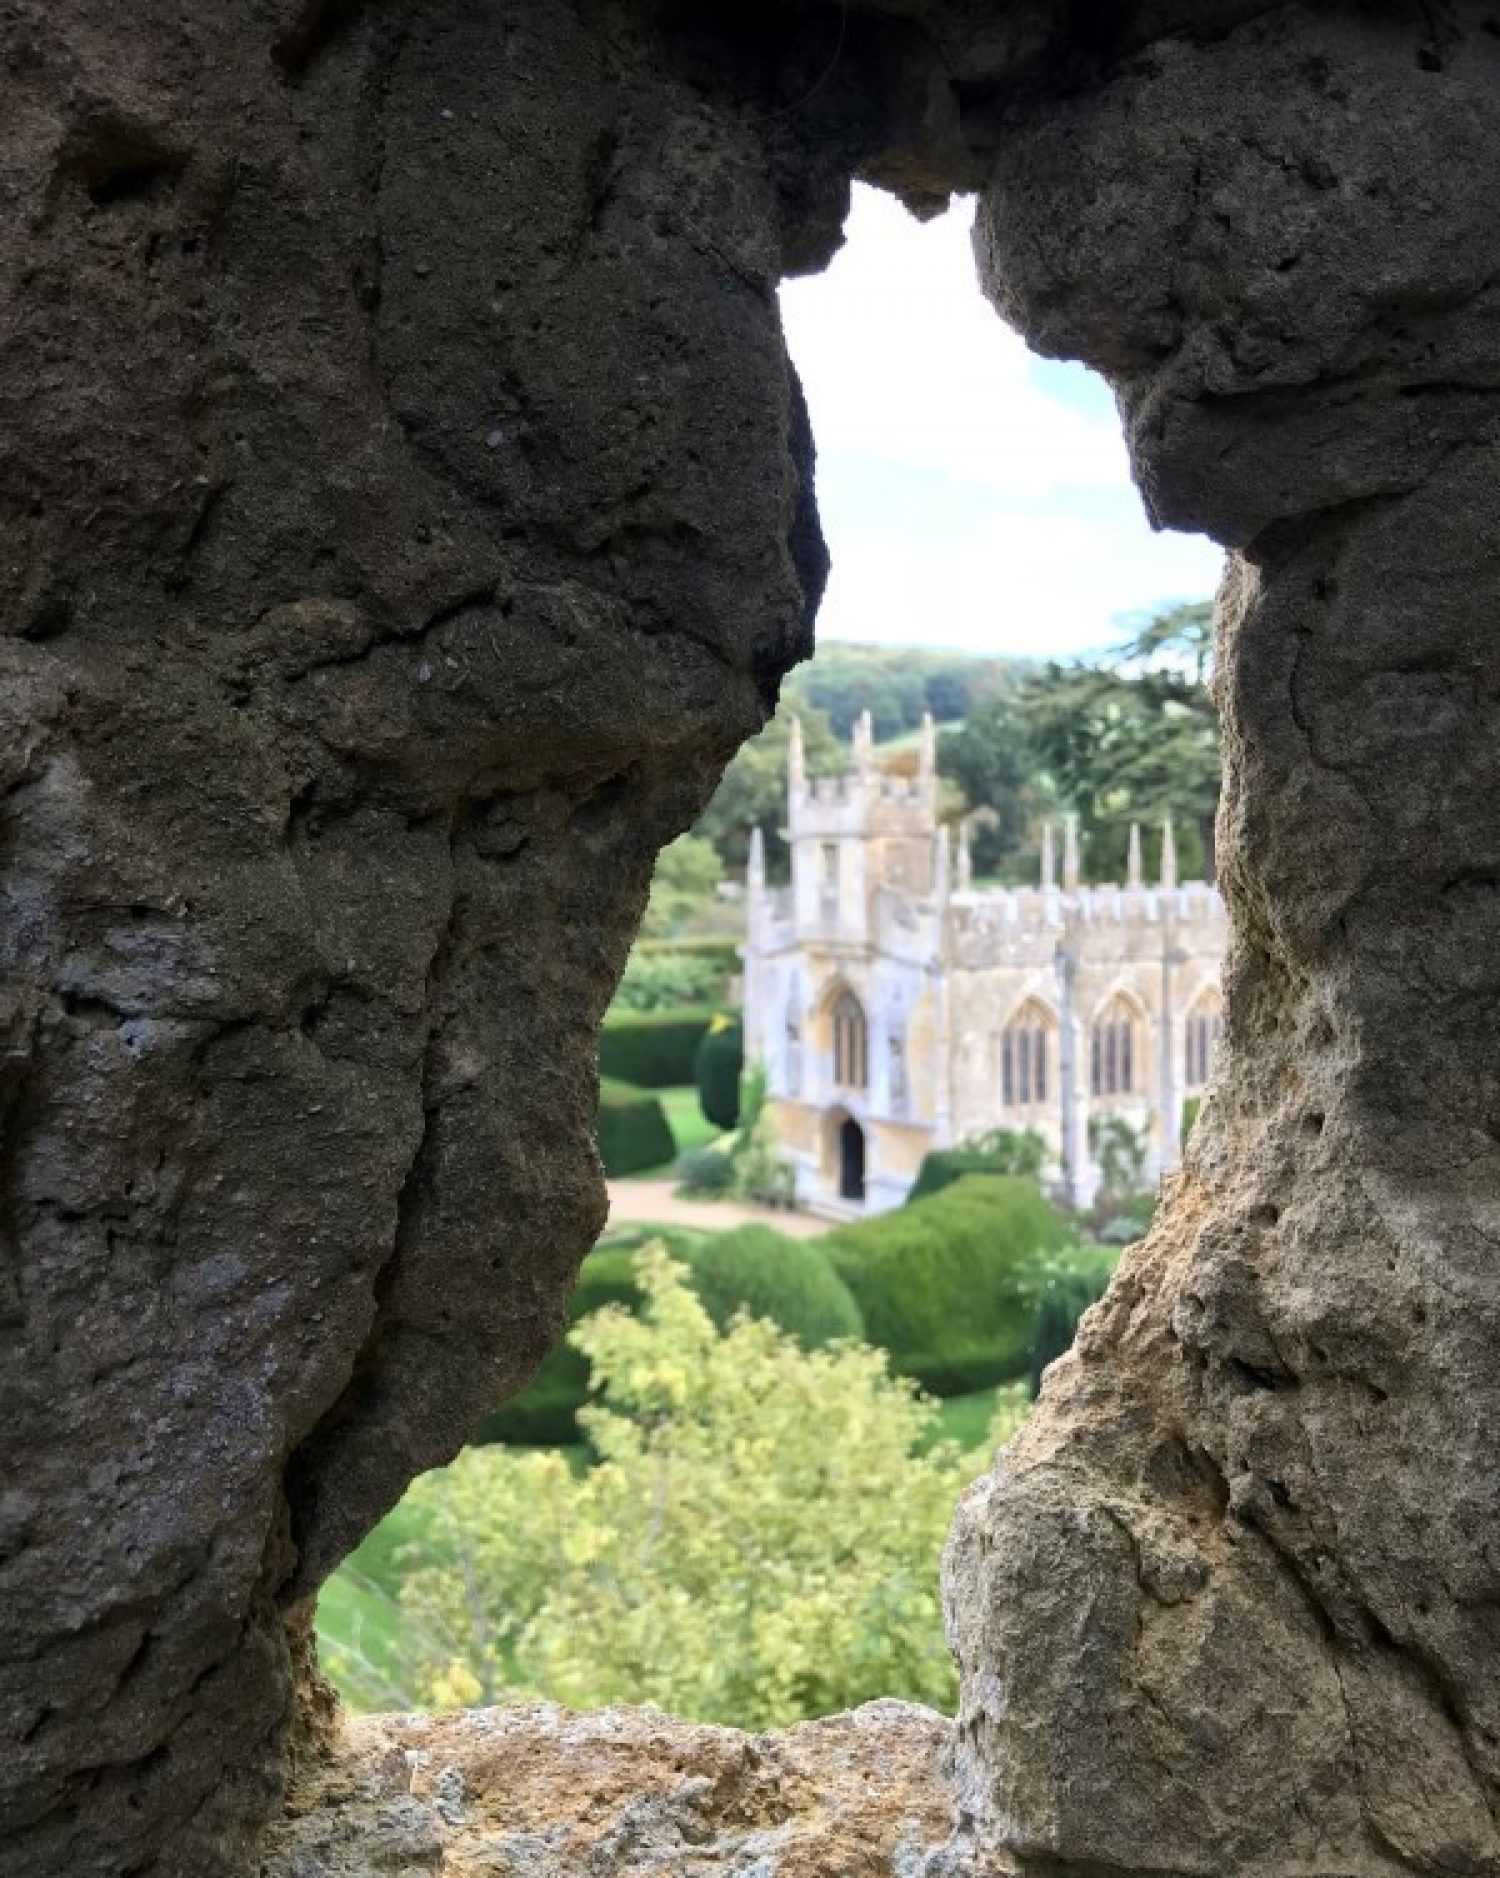 View of a church visible through a hole in a wall